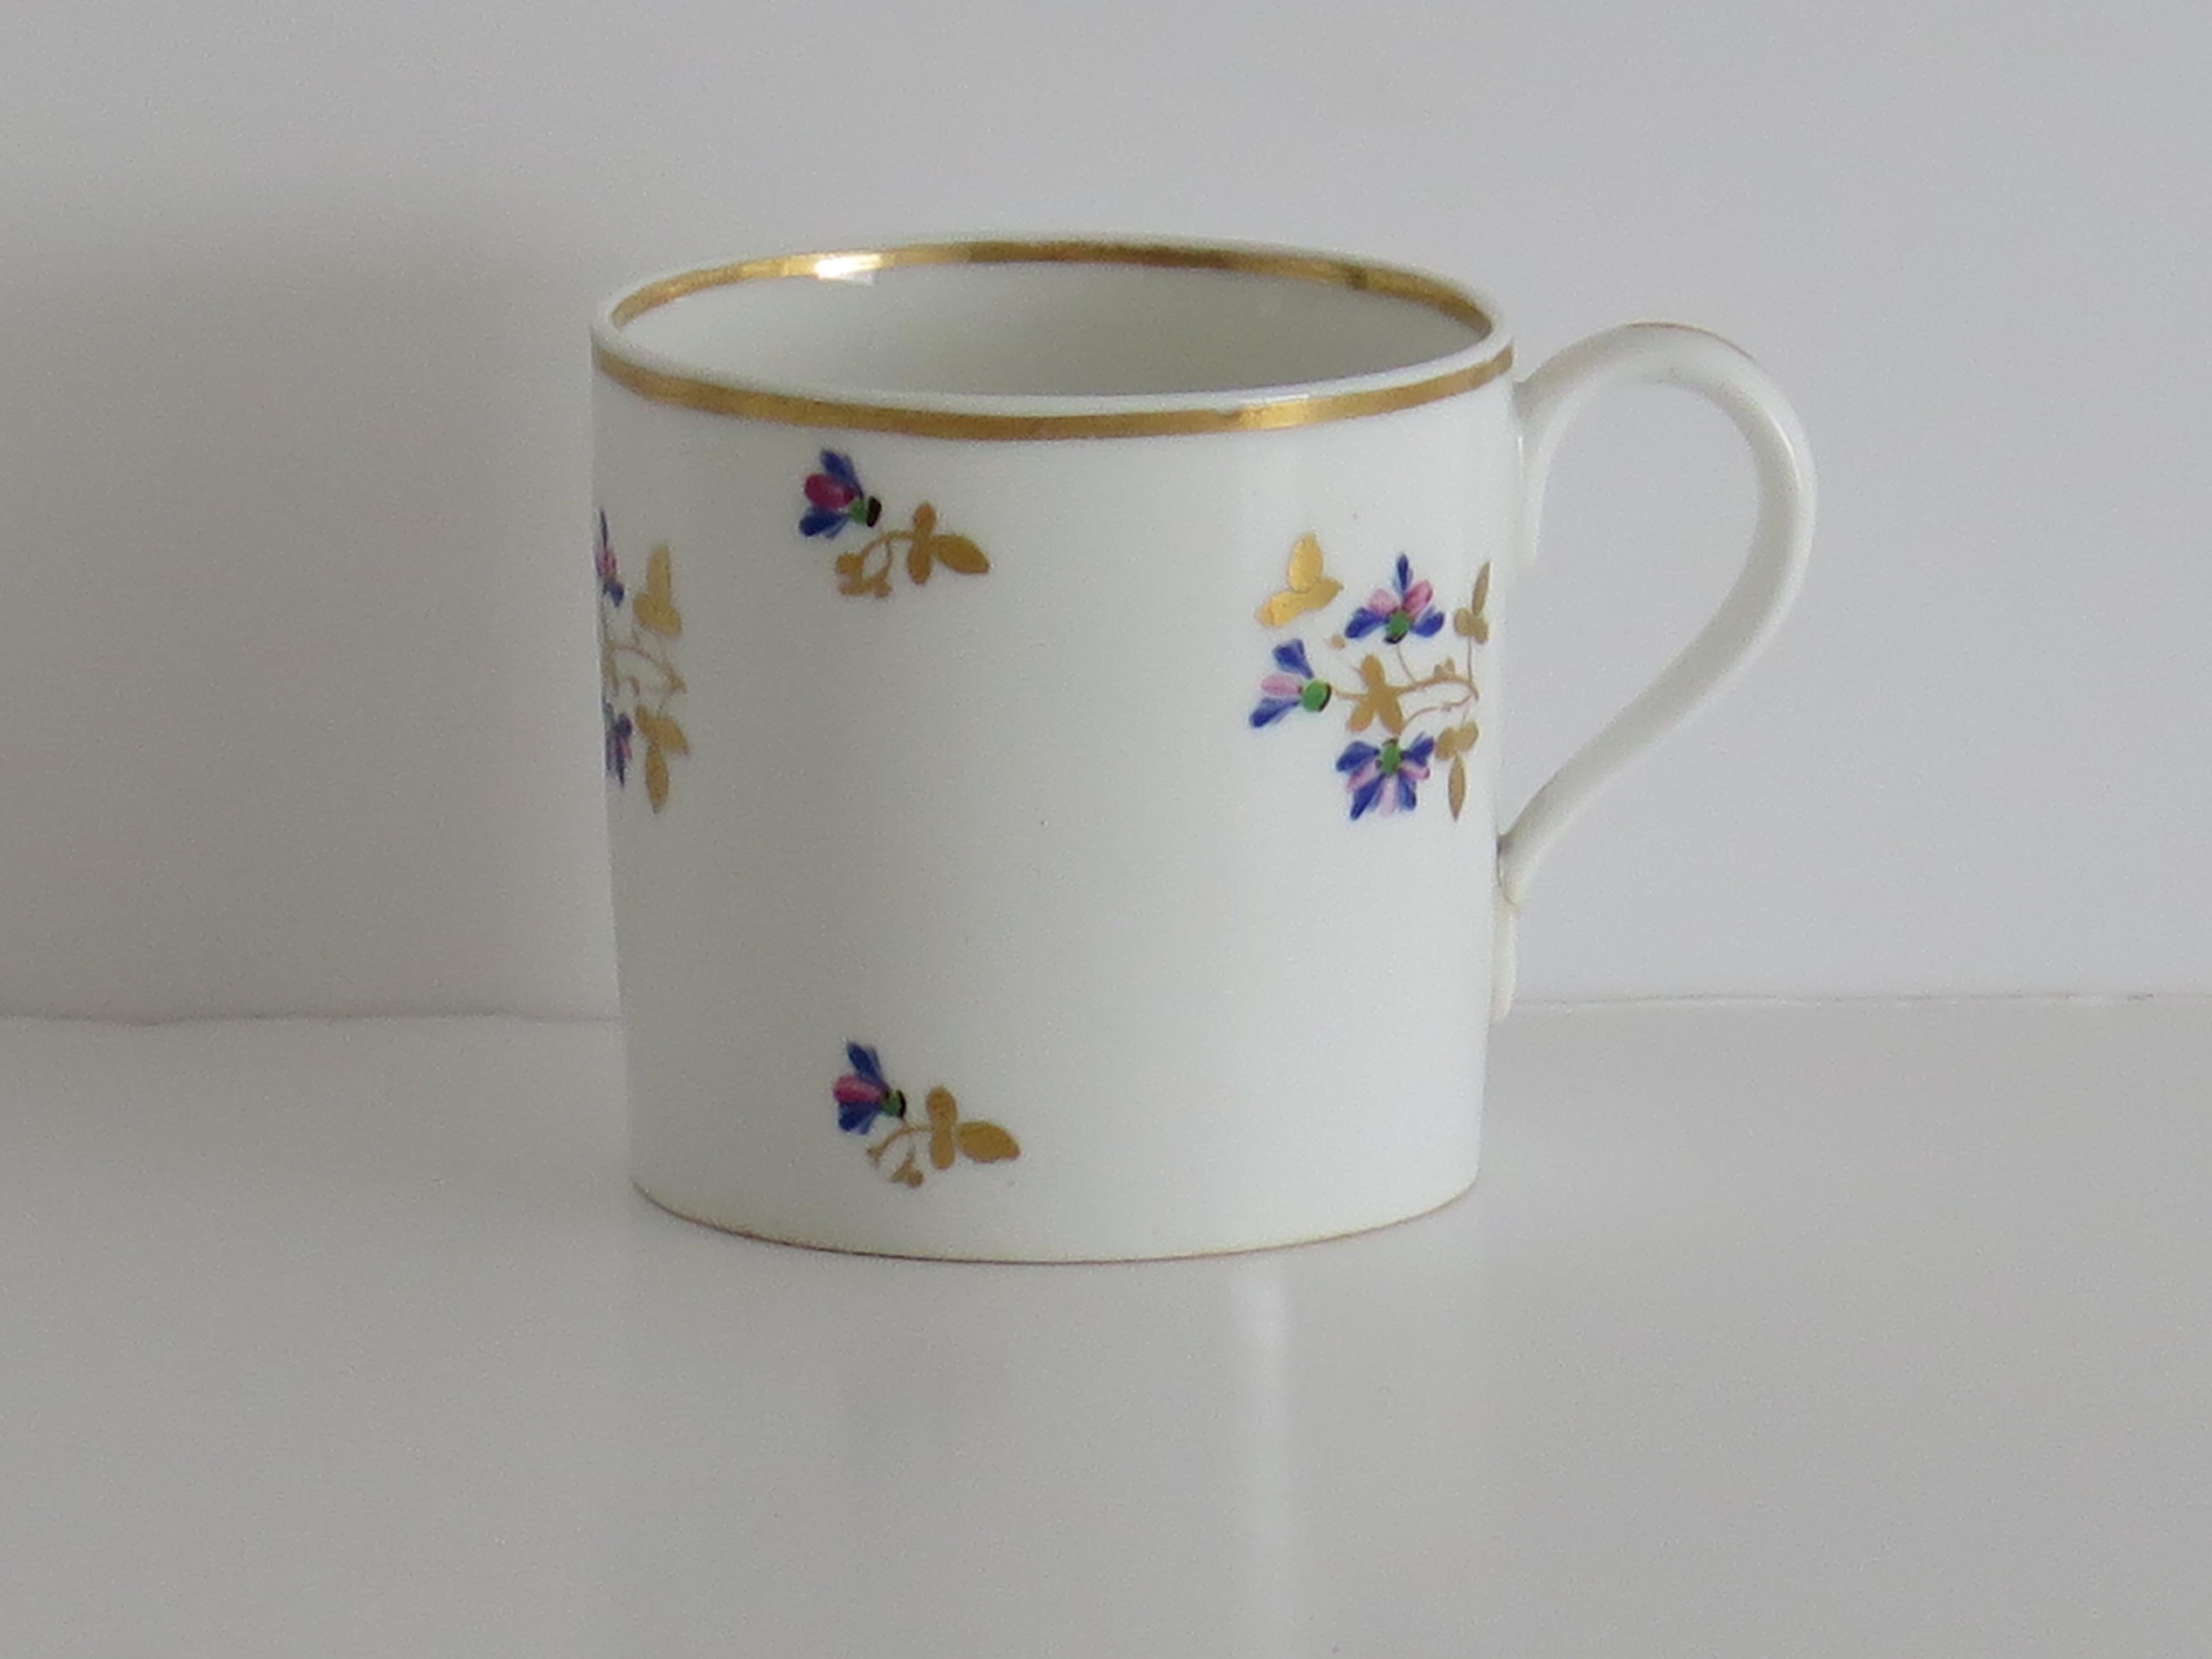 This is a good porcelain Coffee Can or cup hand painted and gilded in pattern 129, made by the Derby factory, in the reign of George 111 in the early 19th century, circa 1810.

It is nominally straight sided with a plain loop handle.

The Coffee Can